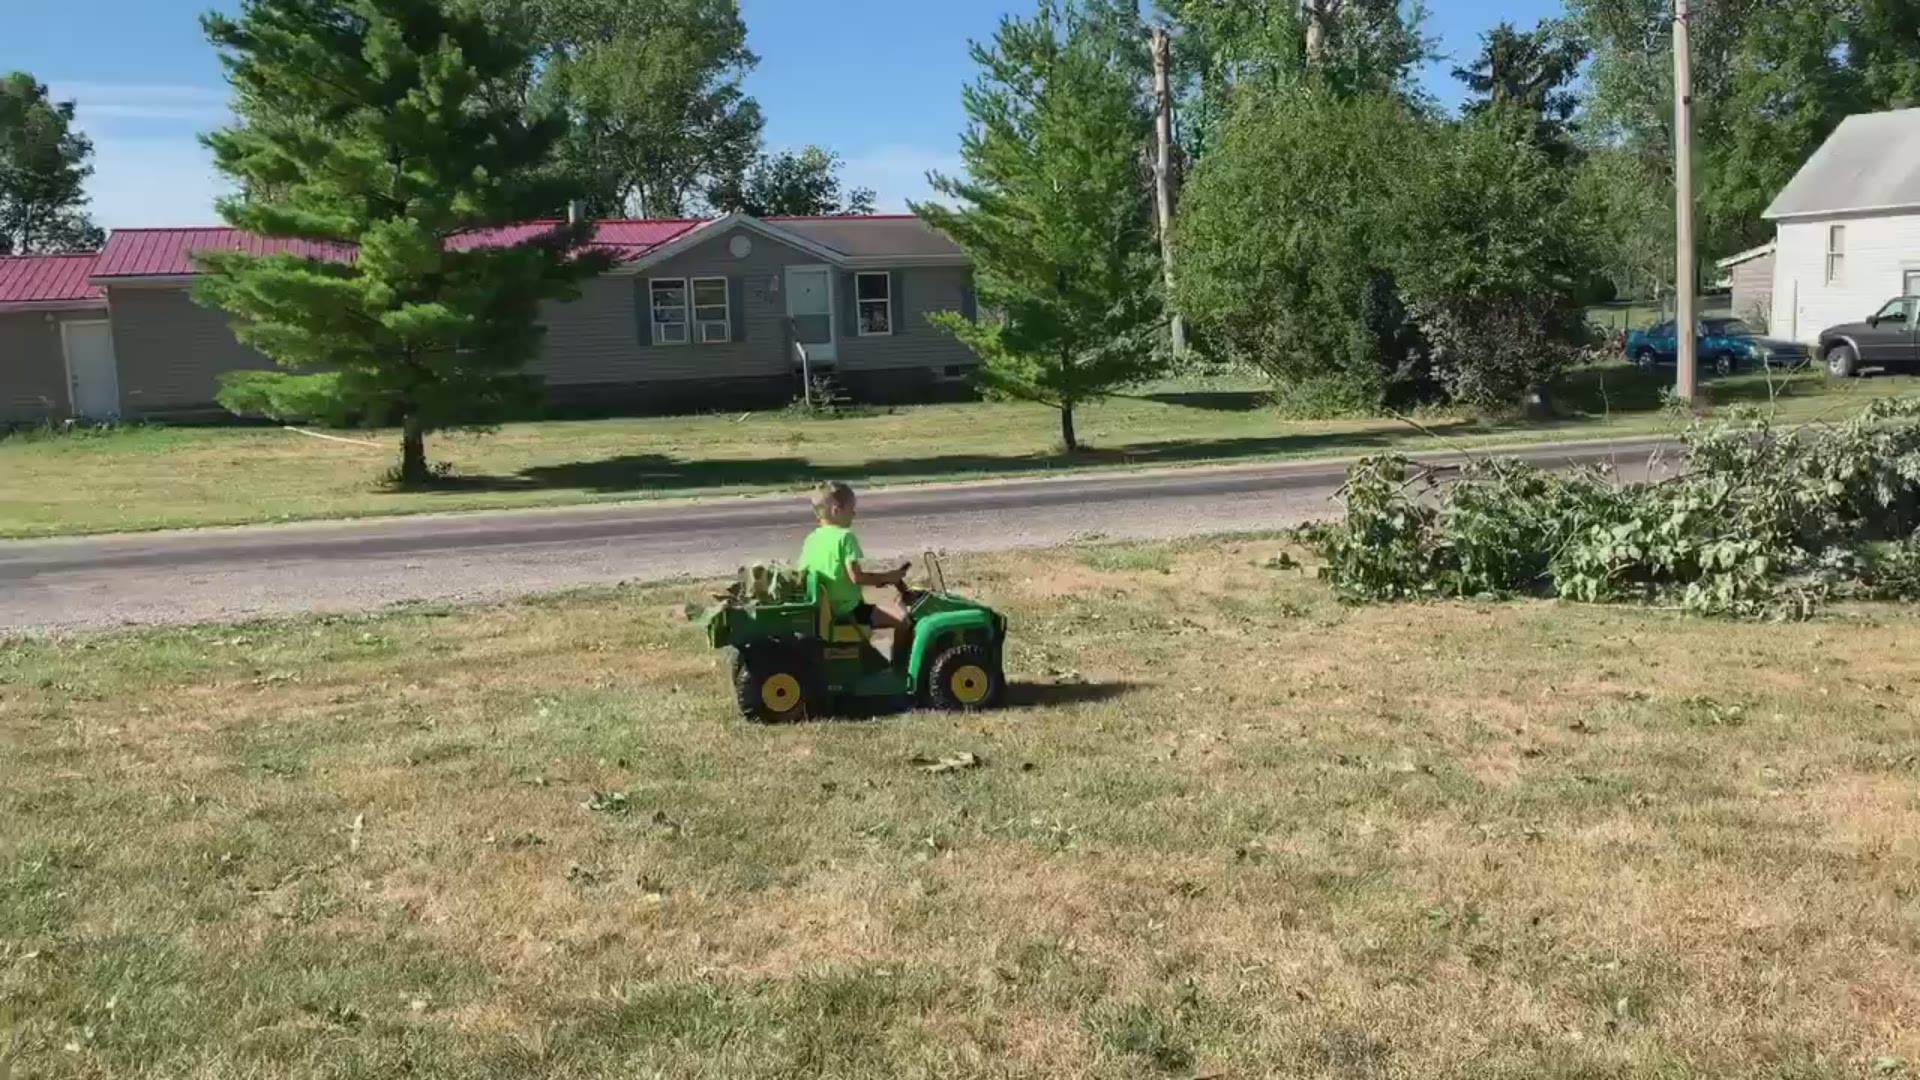 7-year-old boy drives his gator to help clean up storm debris